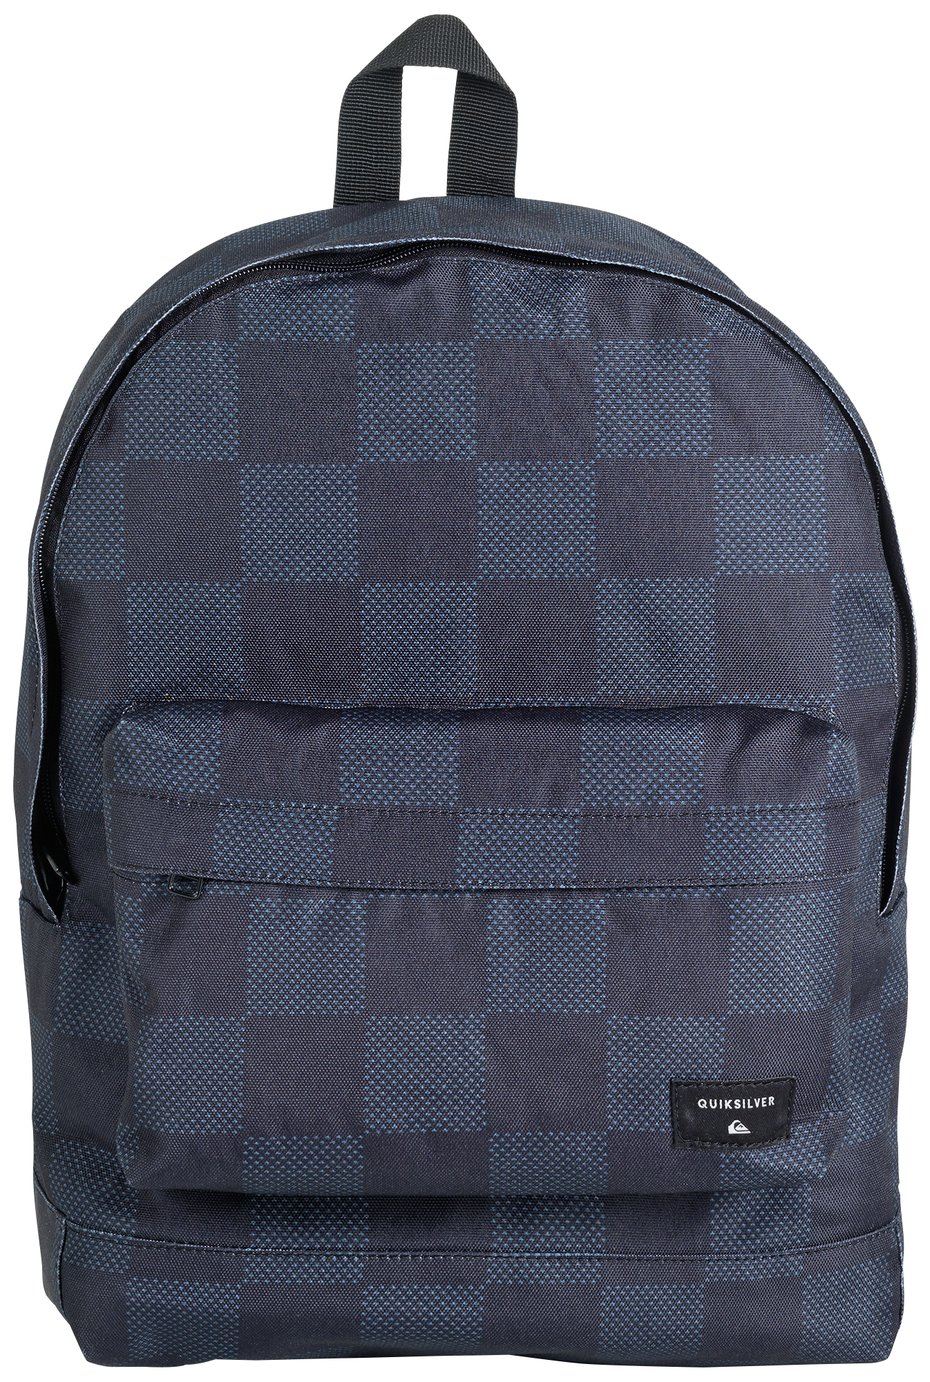 Quiksilver Check Backpack